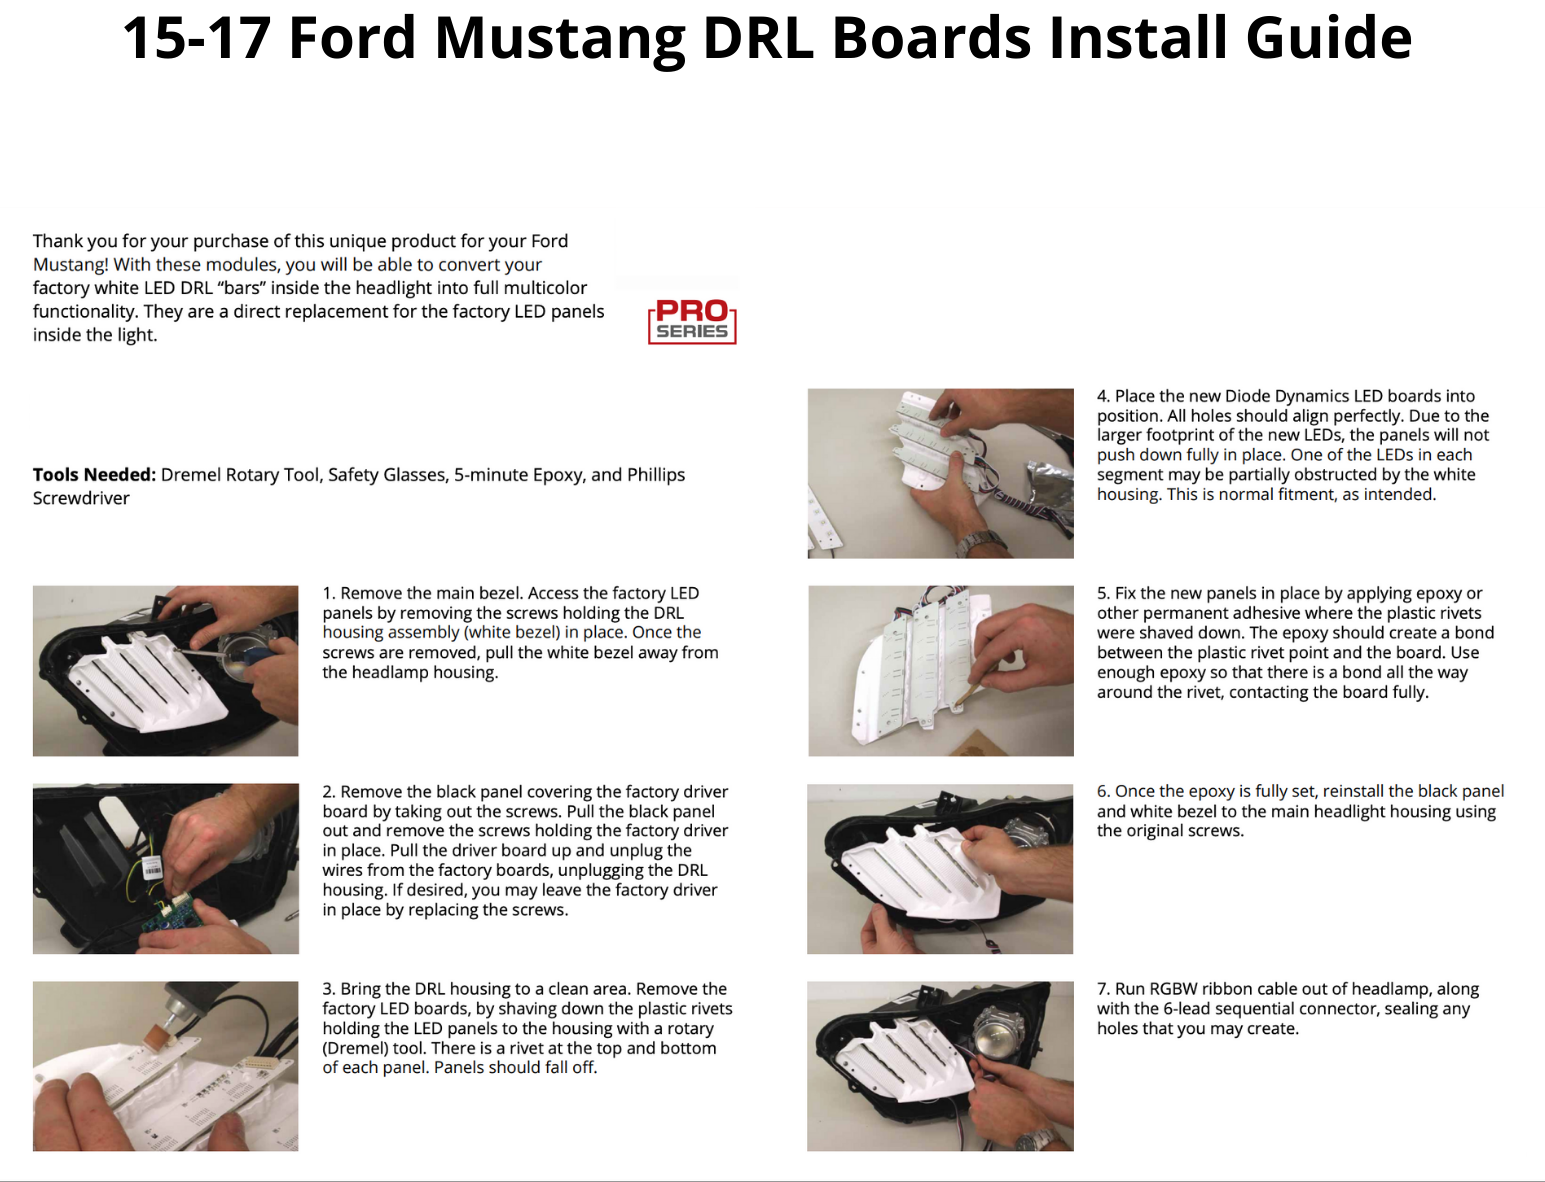 15-17_Ford_Mustang_DRL_Boards_Install_Guide.png